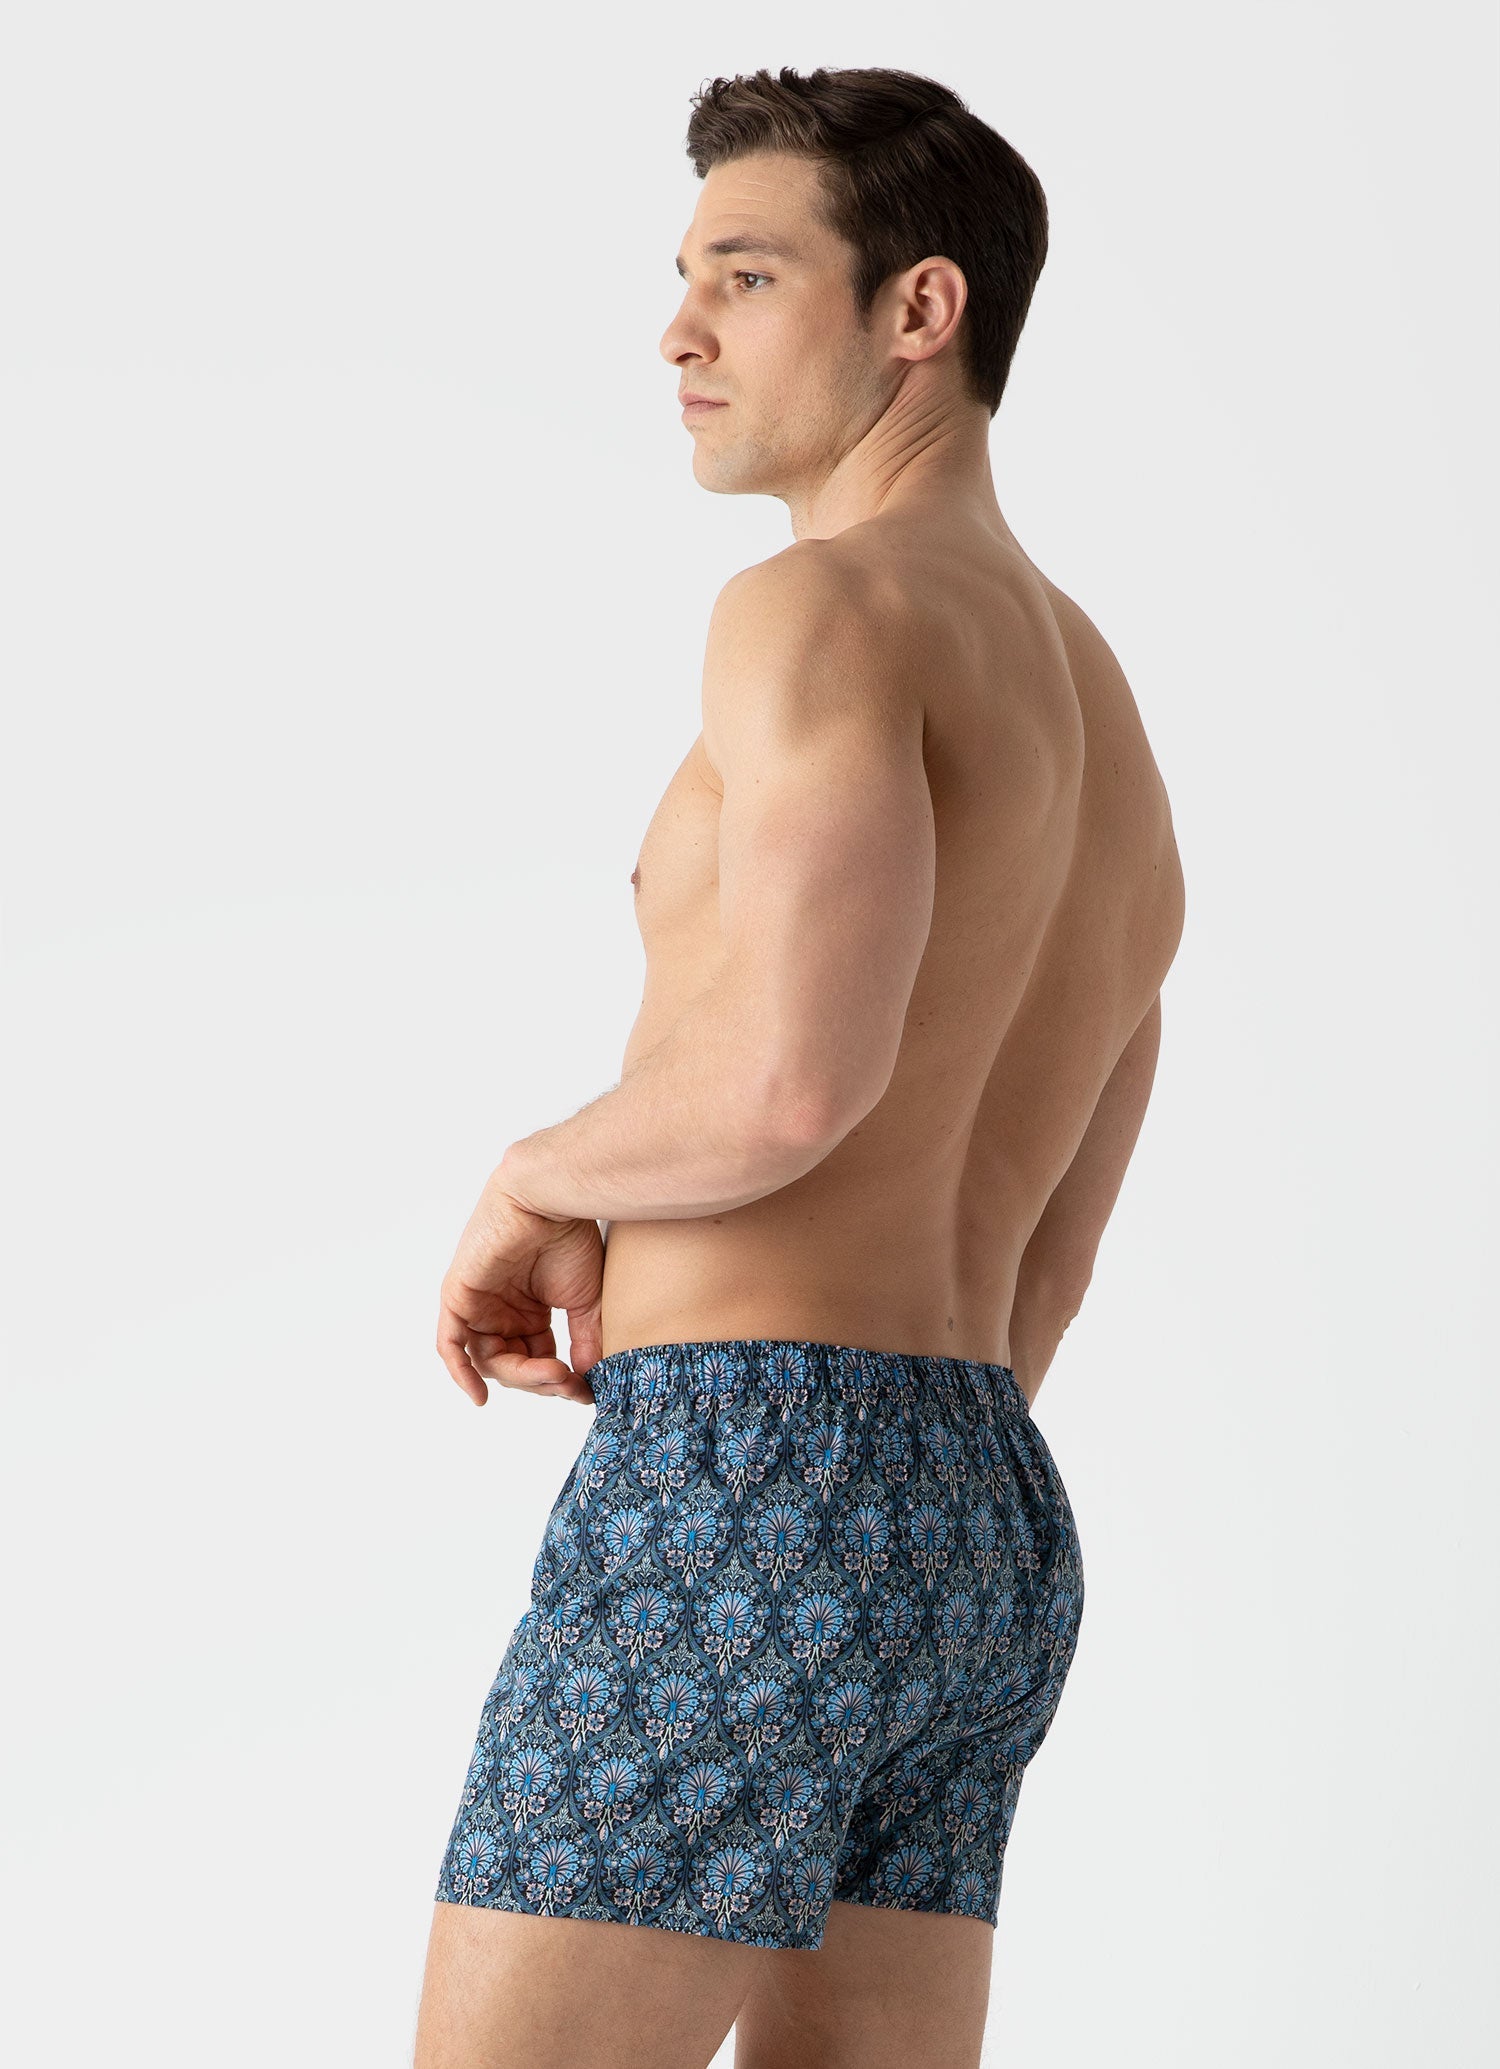 Men's Classic Boxer Shorts in Liberty Fabric Peacock Place